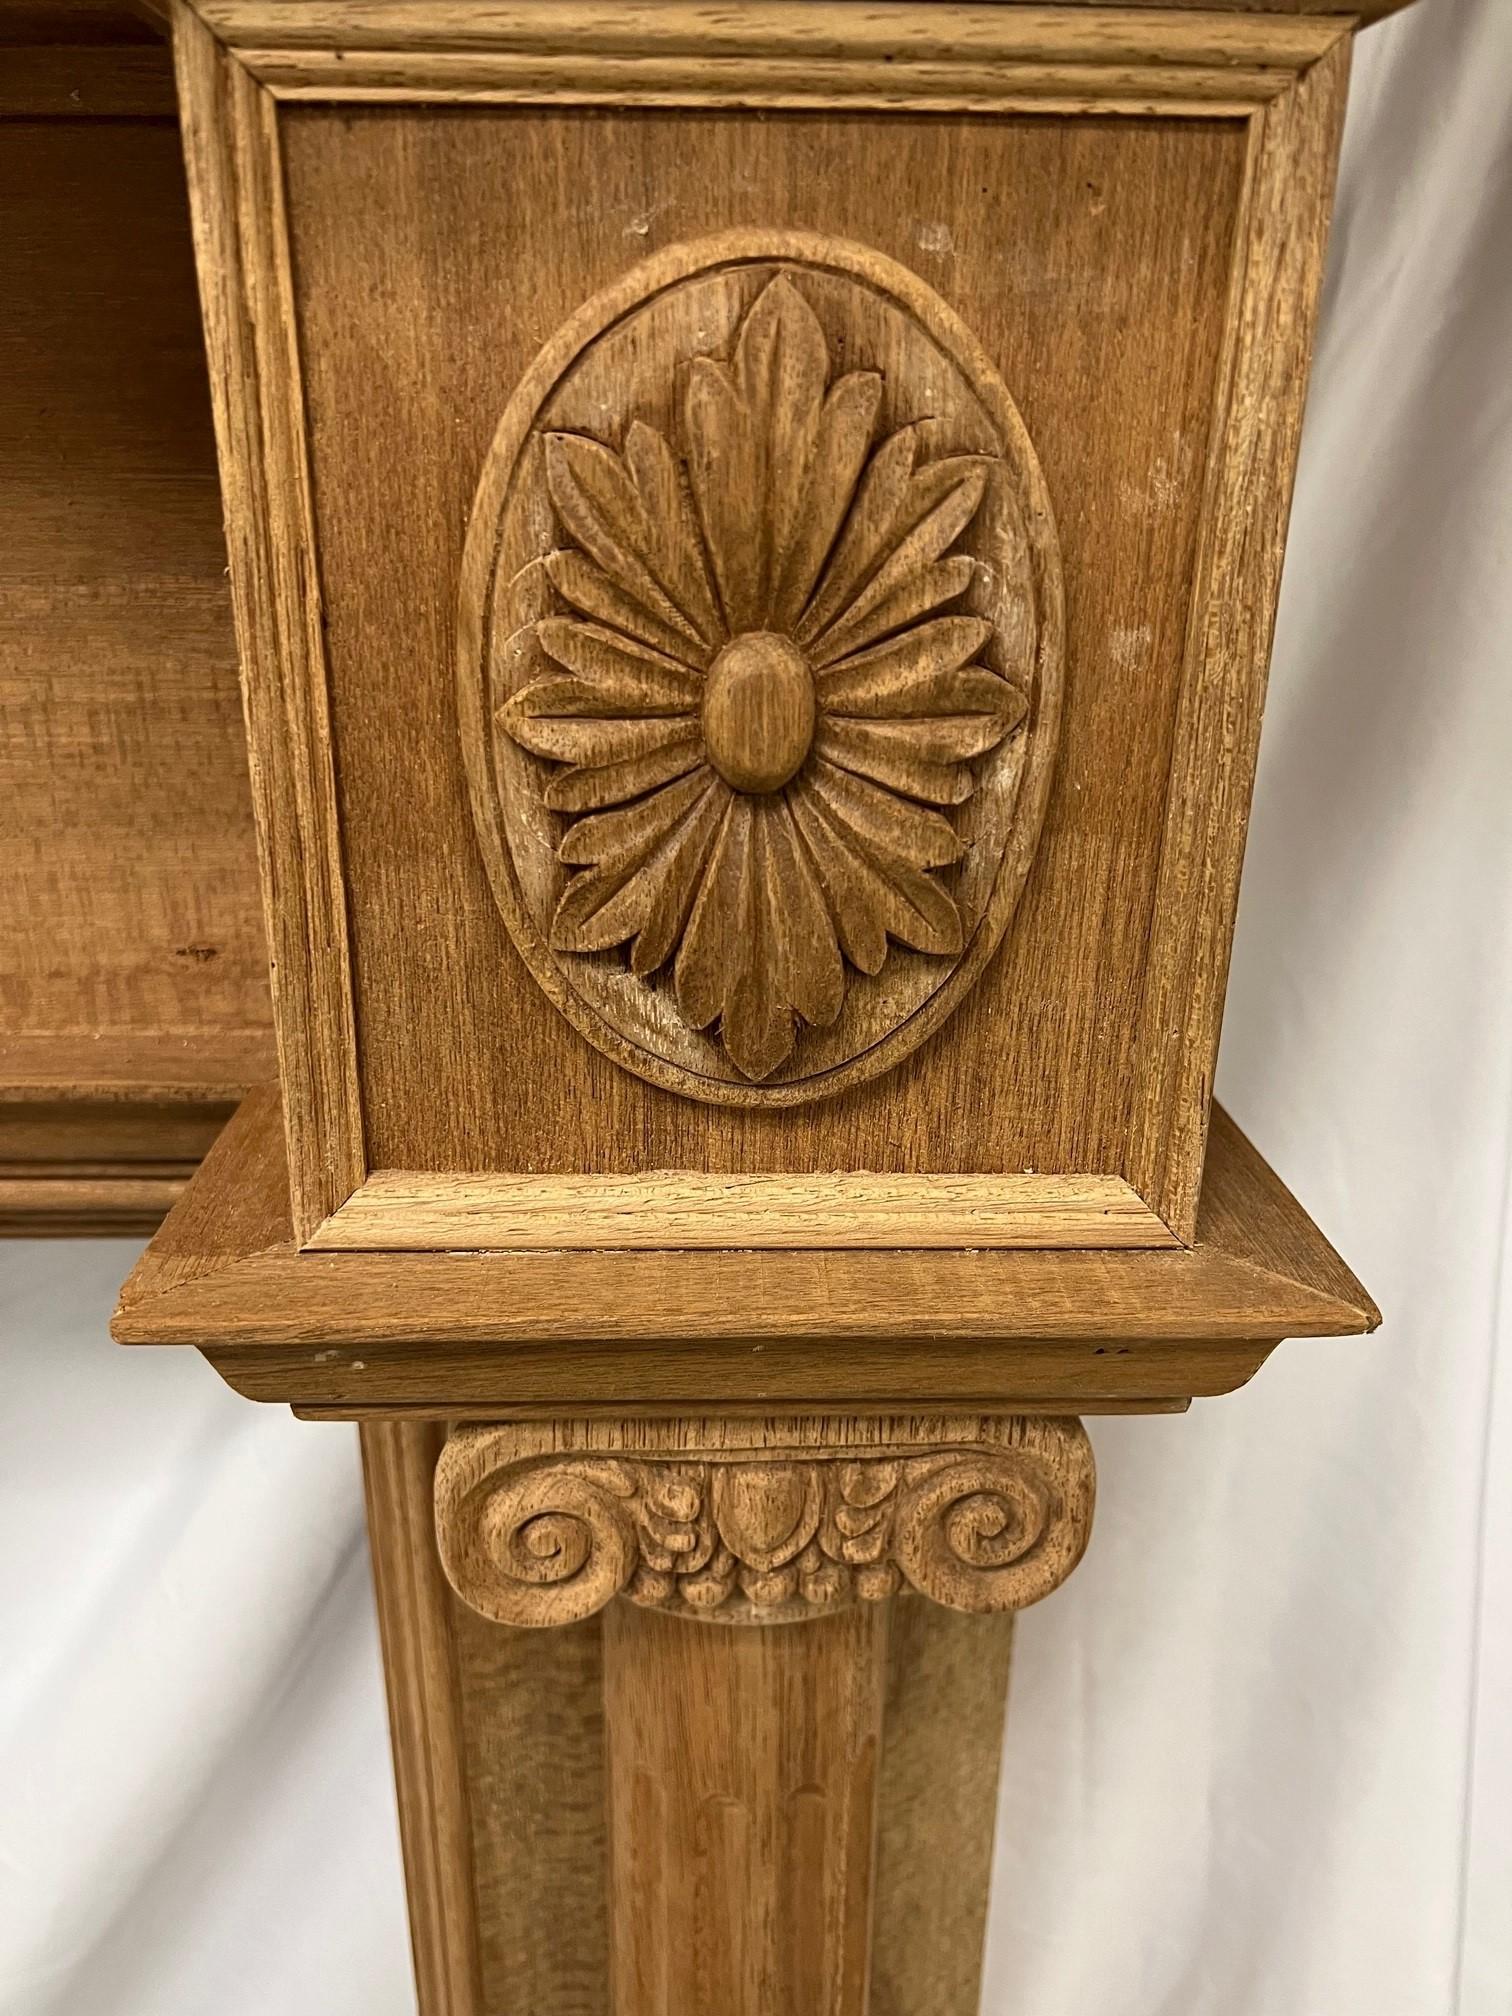 Reproduction Mahogany Fireplace Mantel with Fluted Columns and Carved Capitals  In Good Condition For Sale In Stamford, CT